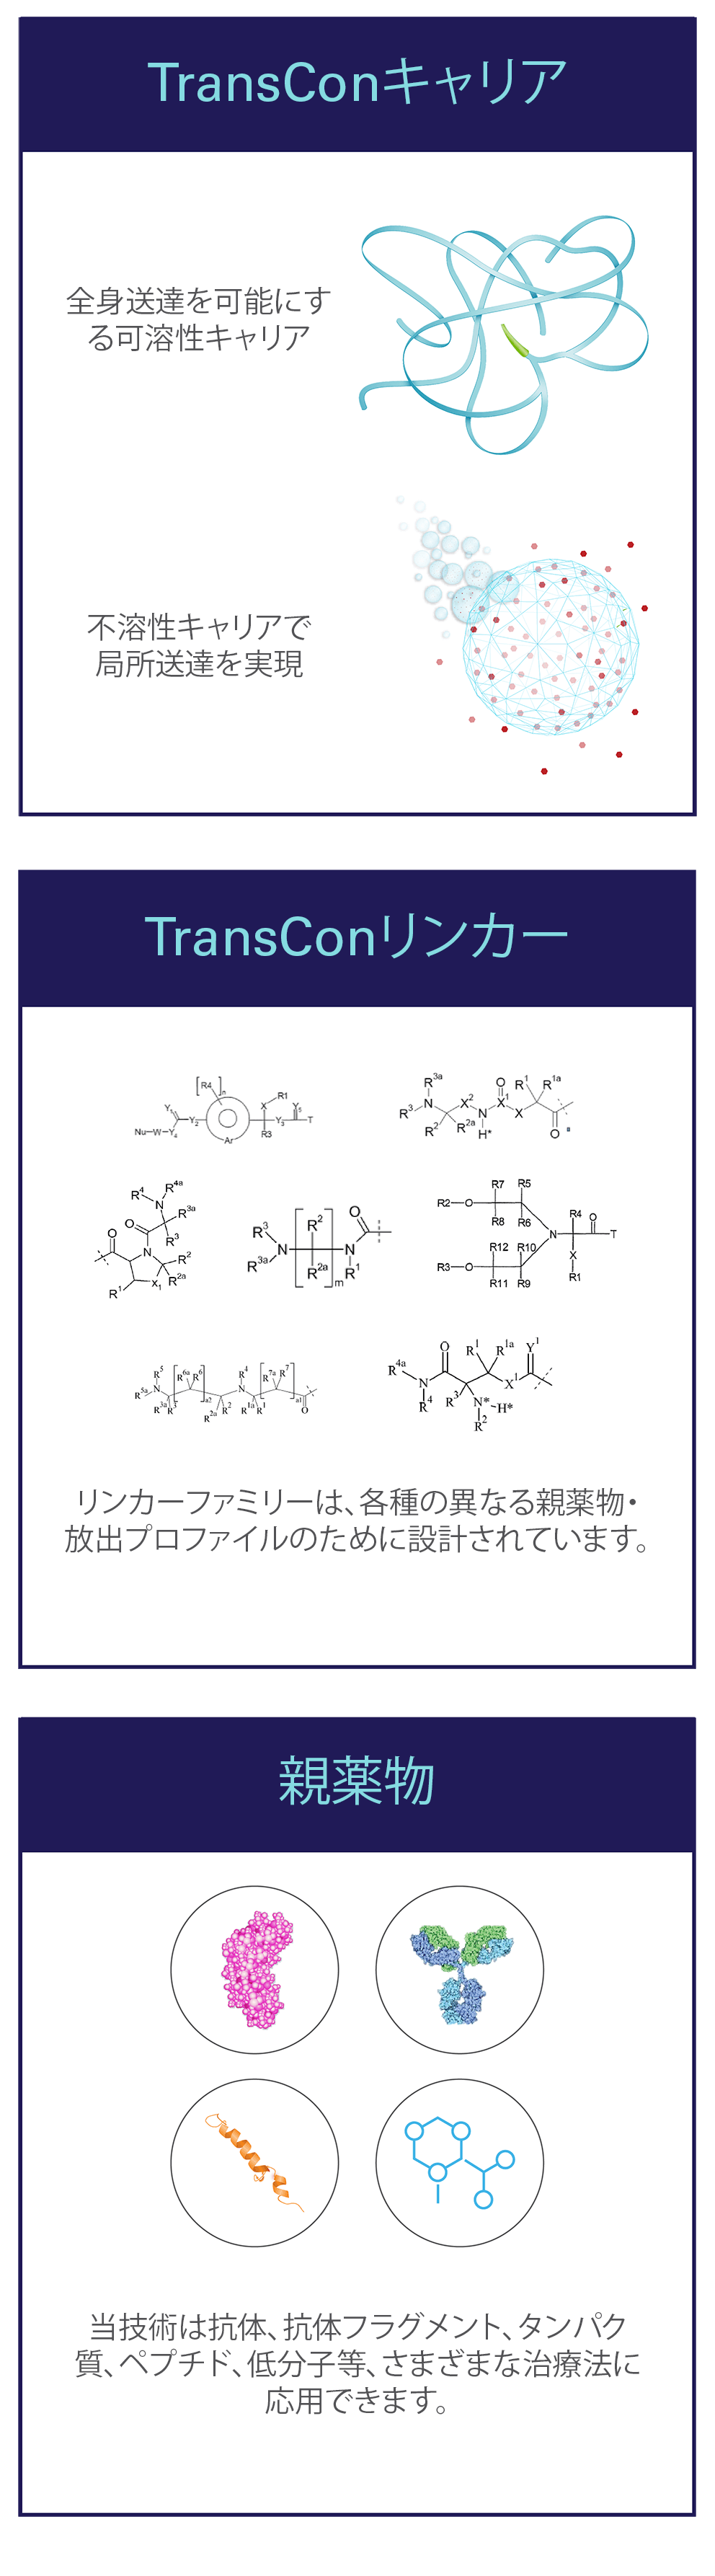 outlined_Technology_Transient_Conjugation_Graphic-2_jp